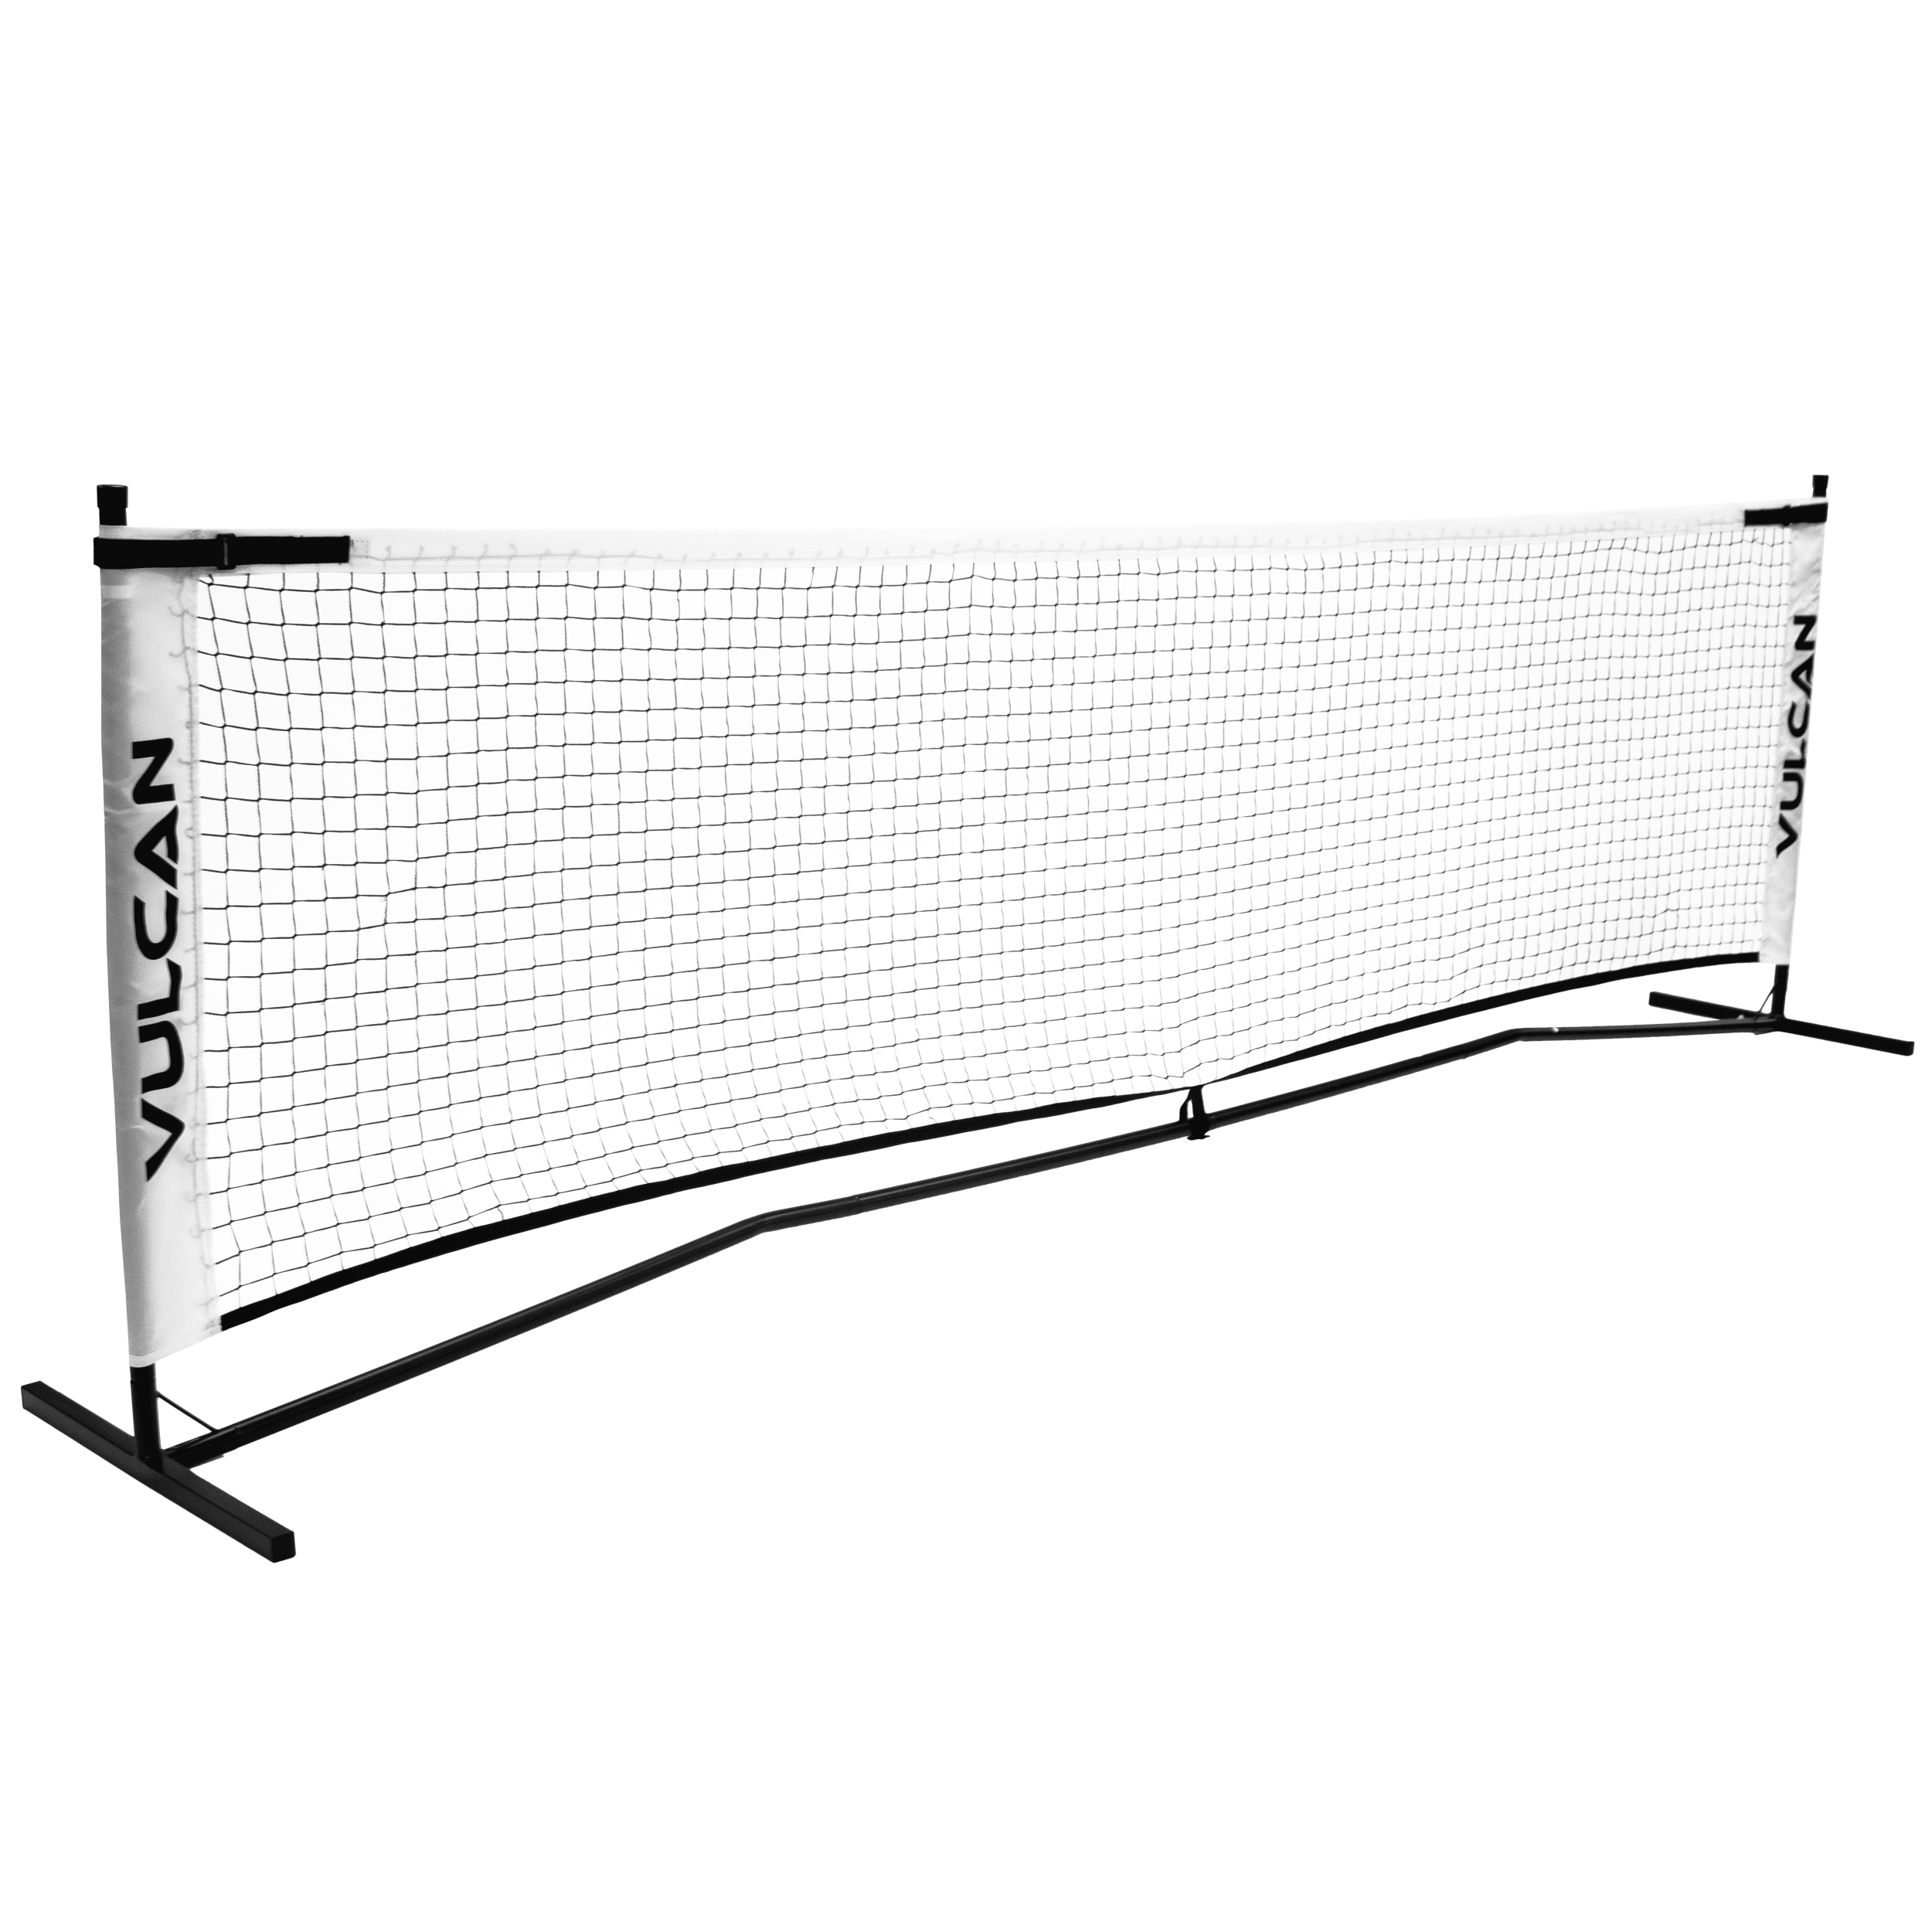 Amazin' Aces Portable Pickleball Net with Easy Snap Metal Frame and Carry Bag 